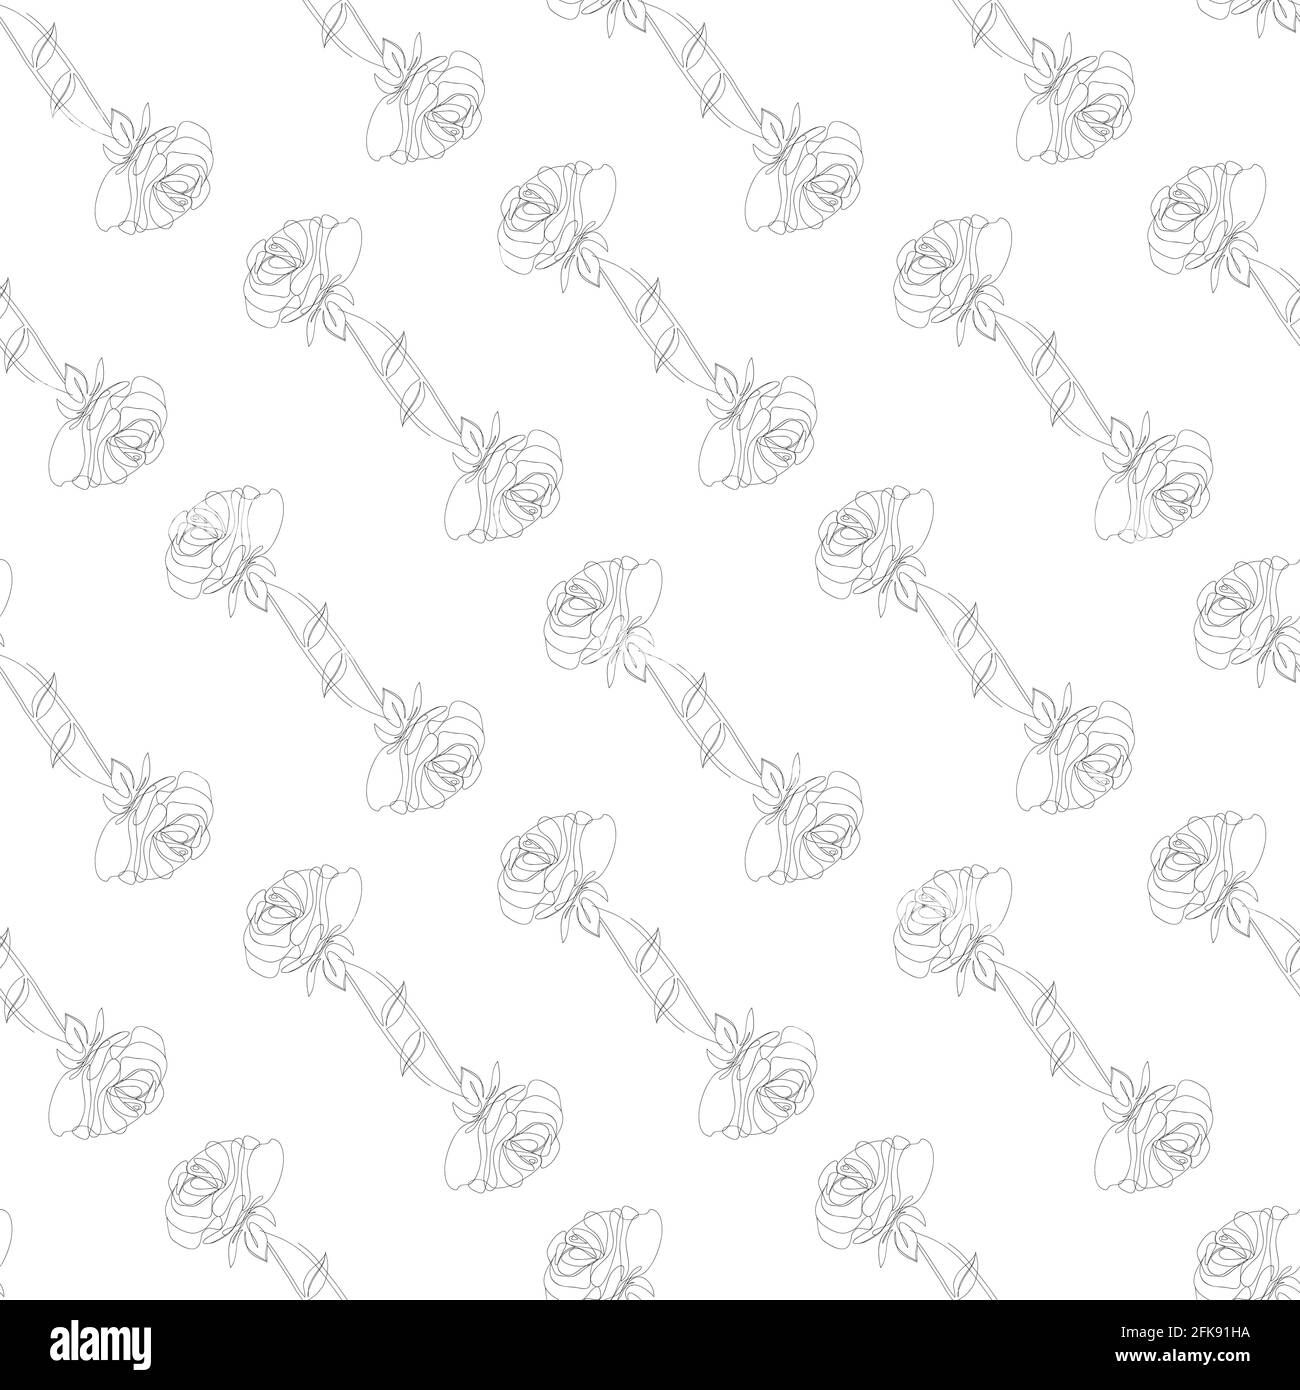 Seamless vector pattern with roses. Black and white floral background with sketch of roses. Stock Vector